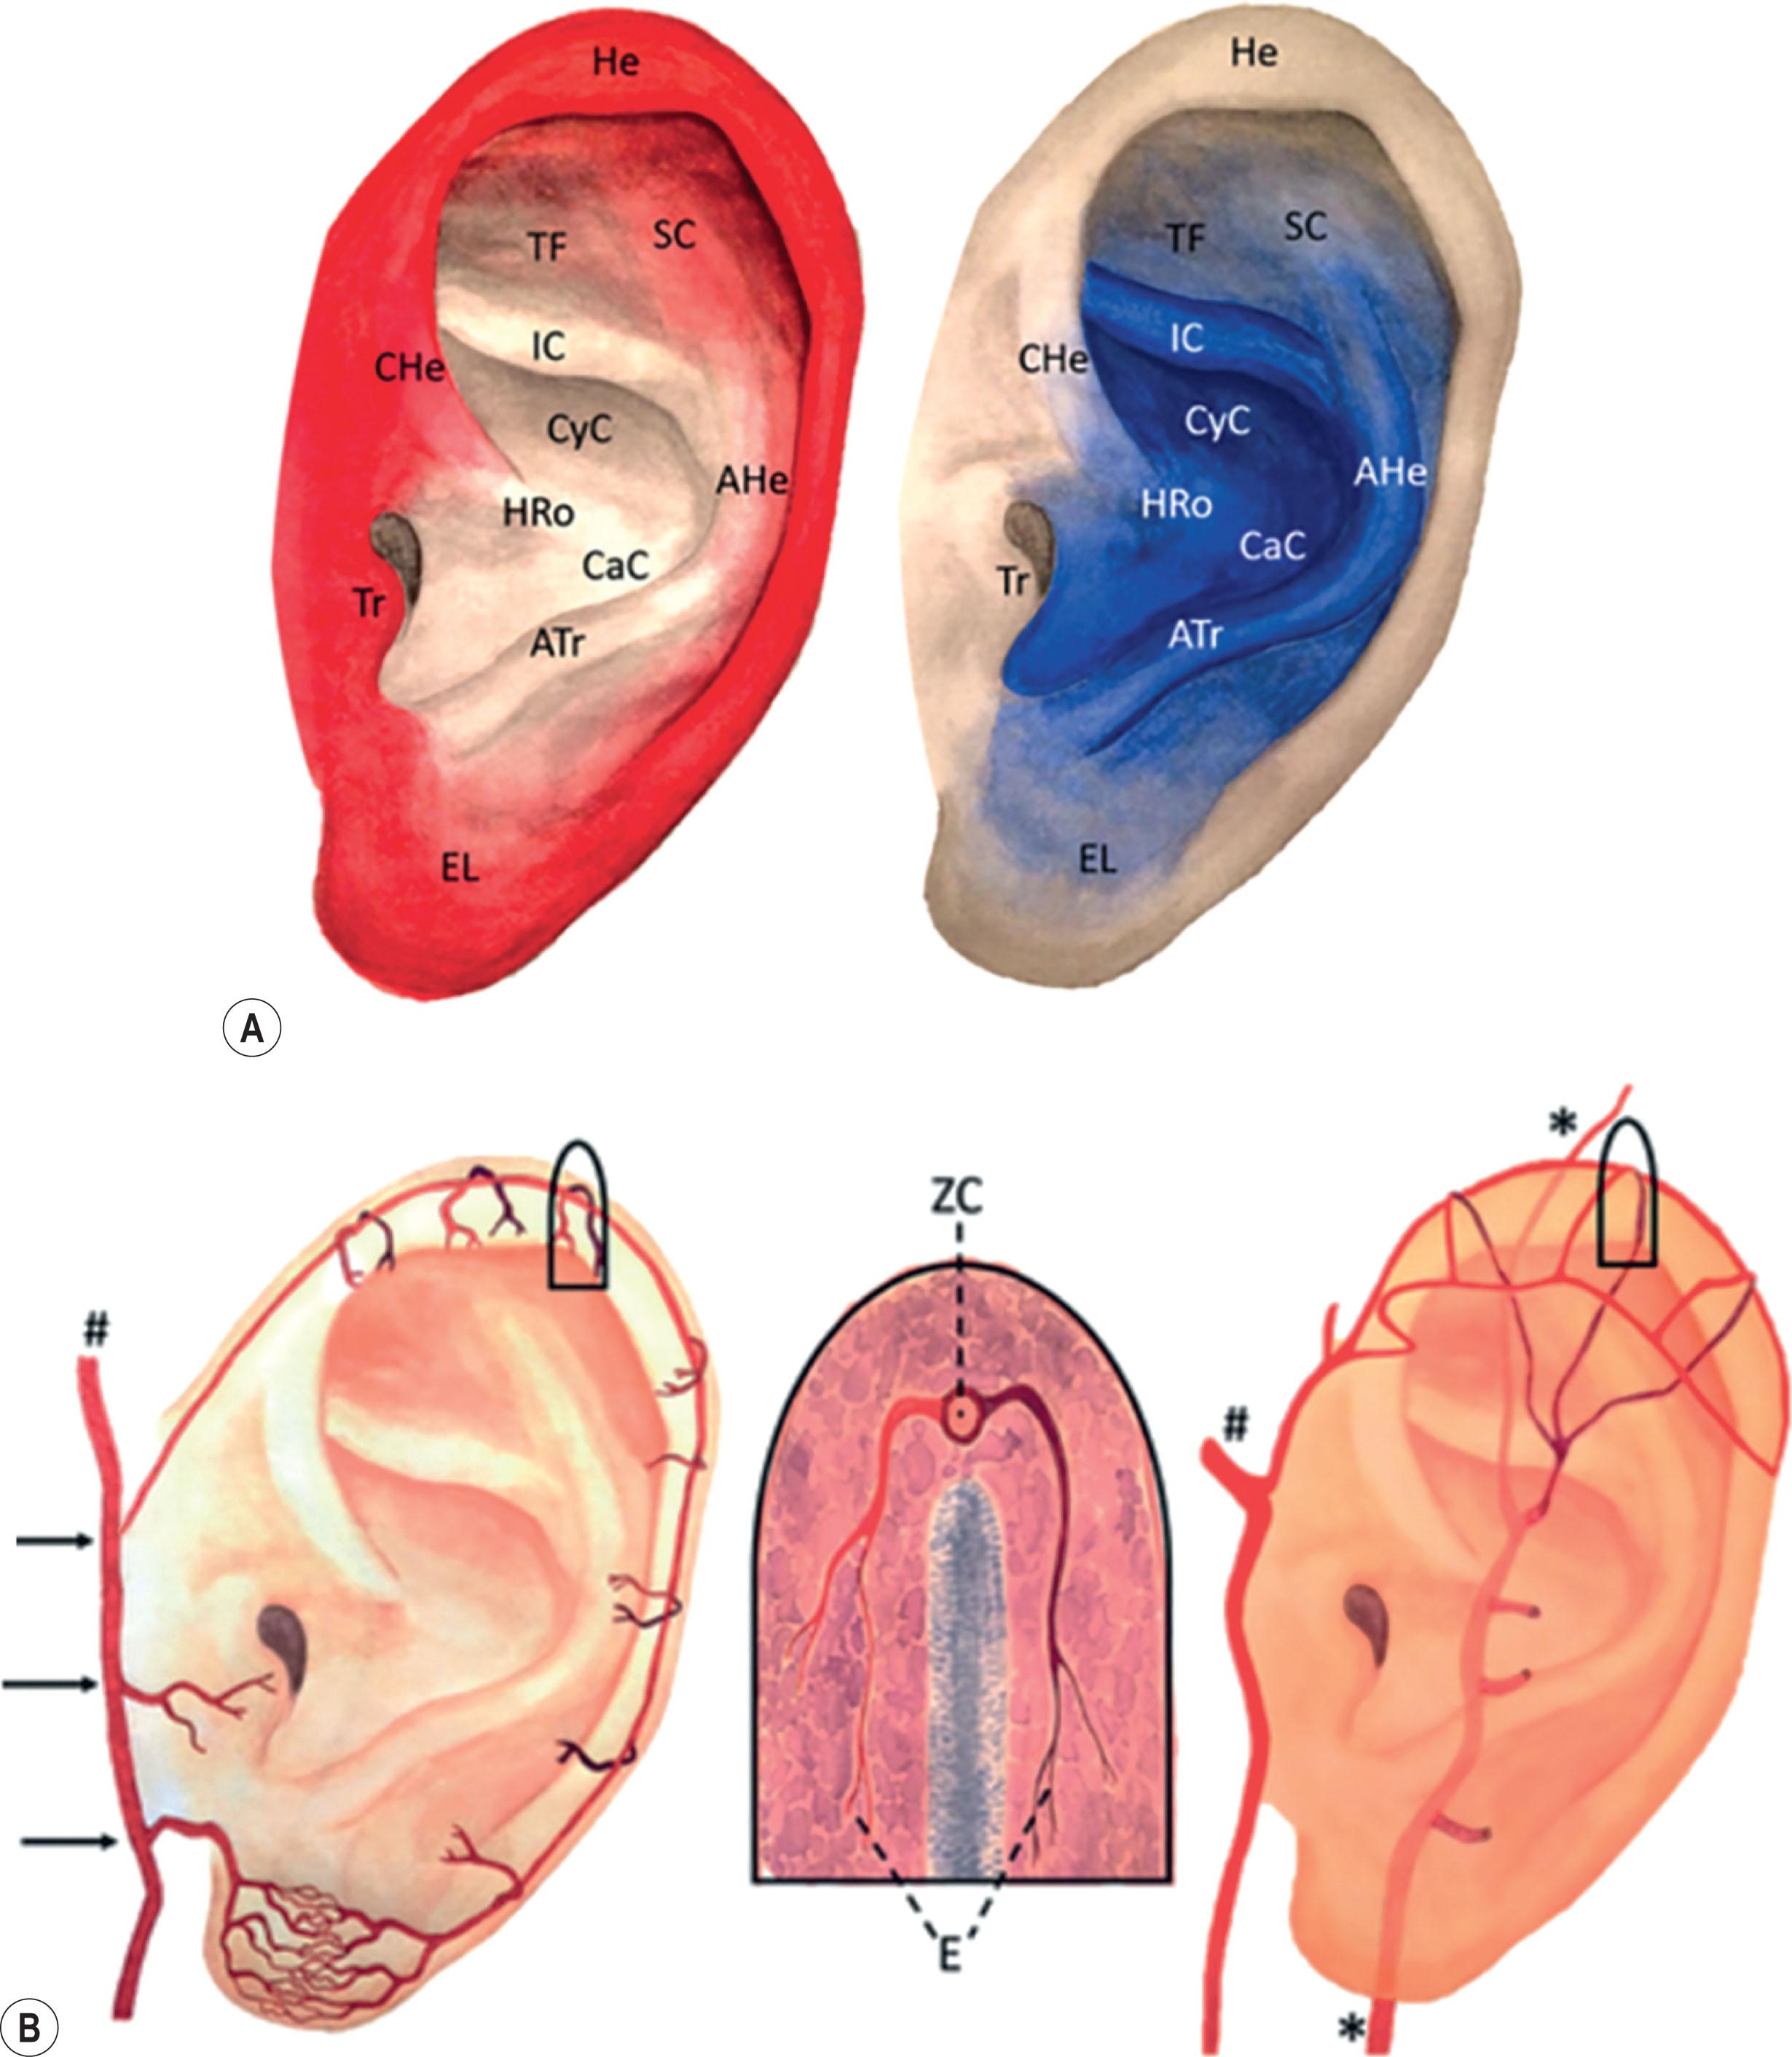 Figure 4.5, (A) Vascular contribution of the superficial temporal artery (STA) in red and posterior auricular artery (PAA) in blue. (B) (Left) three black arrows demonstrating superior, middle, and inferior anterior auricular branches and helical rim arcade. (Middle) Anastomoses of the STA perforators in light red and the PAA perforators in dark red in the helical arcade. (Right) STA and PAA anastomoses forming the helical arcade of the superior third of the helical rim. #, Superficial temporal artery; *, posterior auricular artery.